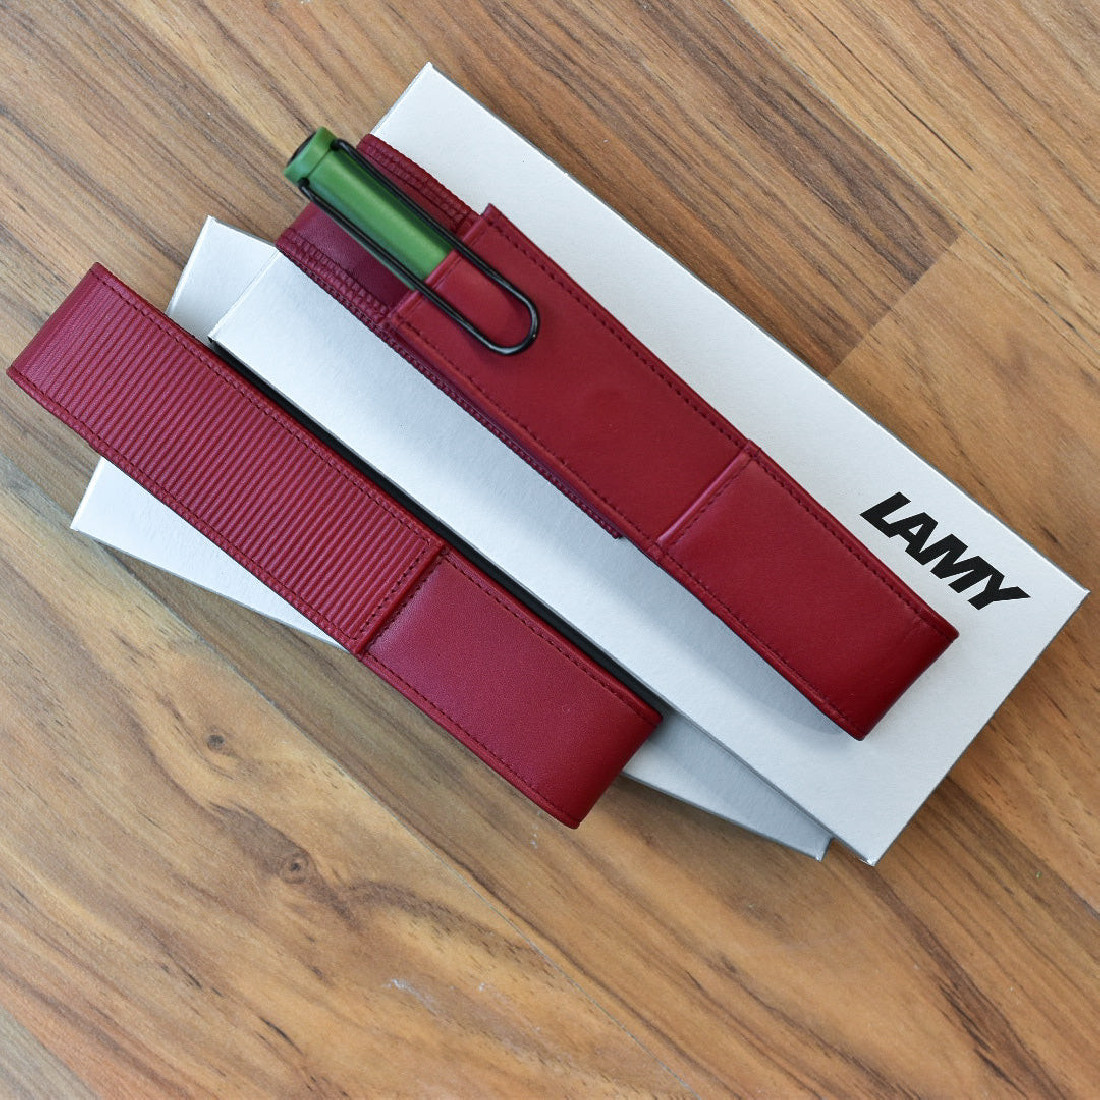 Lamy pen leather case  for 1 pen red A314